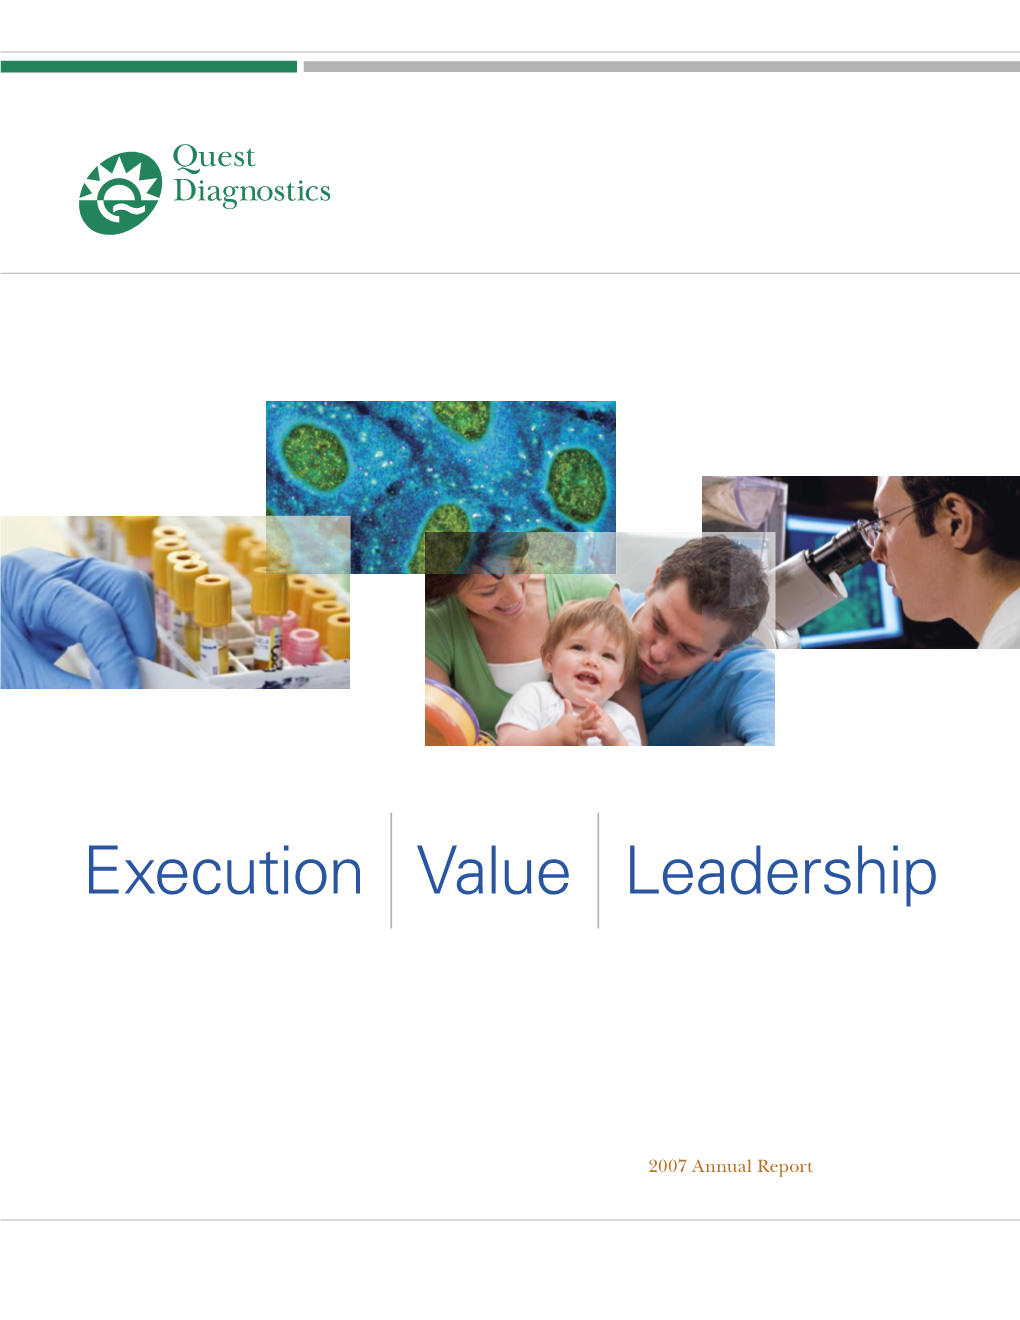 Quest Diagnostics Is the Leading Provider of Diagnostic Testing, Information and Services